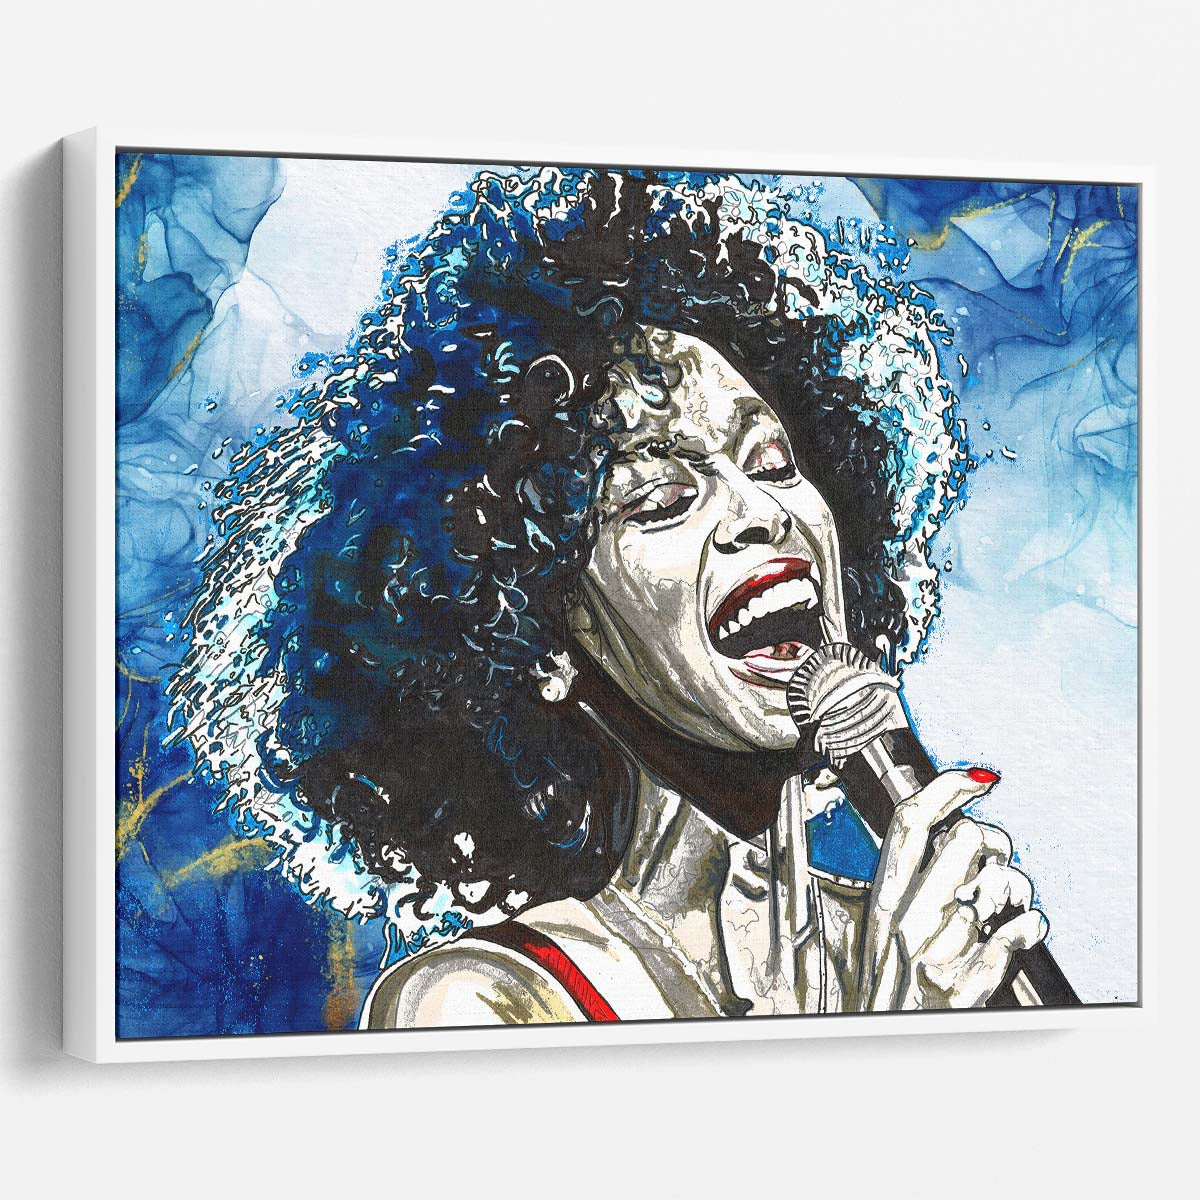 Iconic Whitney Houston Illustration Wall Art by Luxuriance Designs. Made in USA.